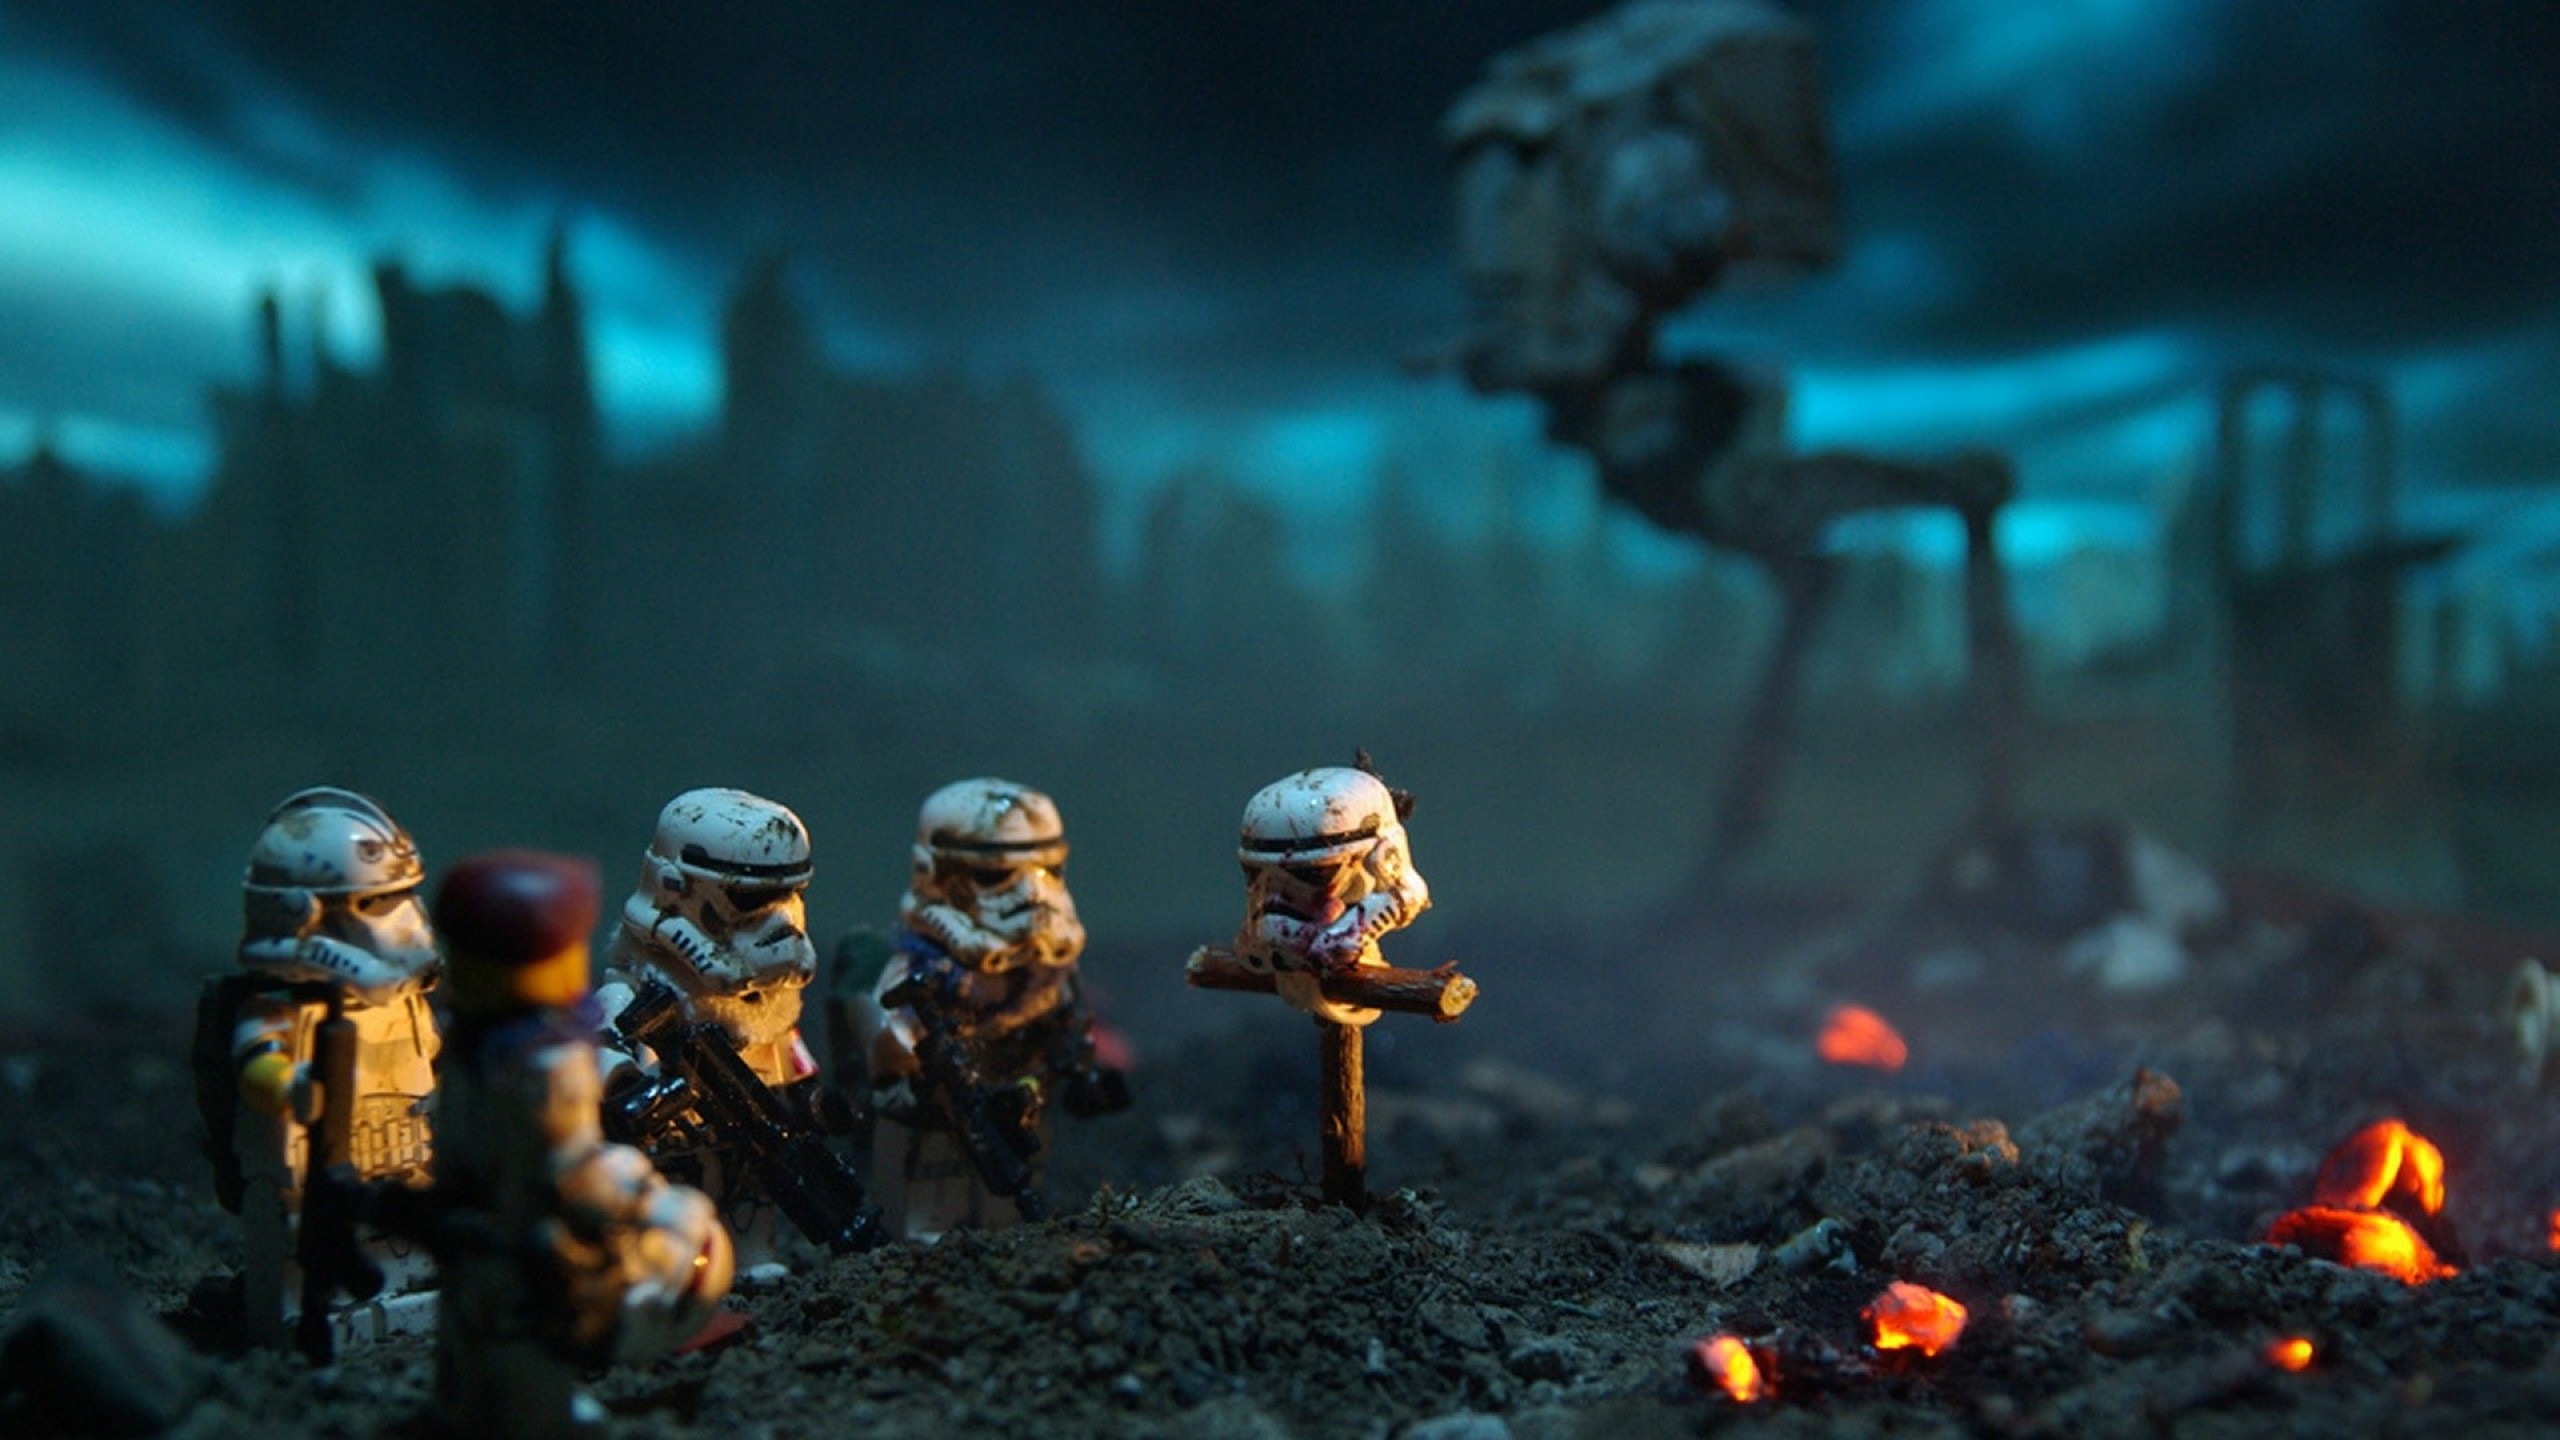 Free Lego Star Wars HD Wallpaper for Desktop and Mobiles Youtube Cover Photo